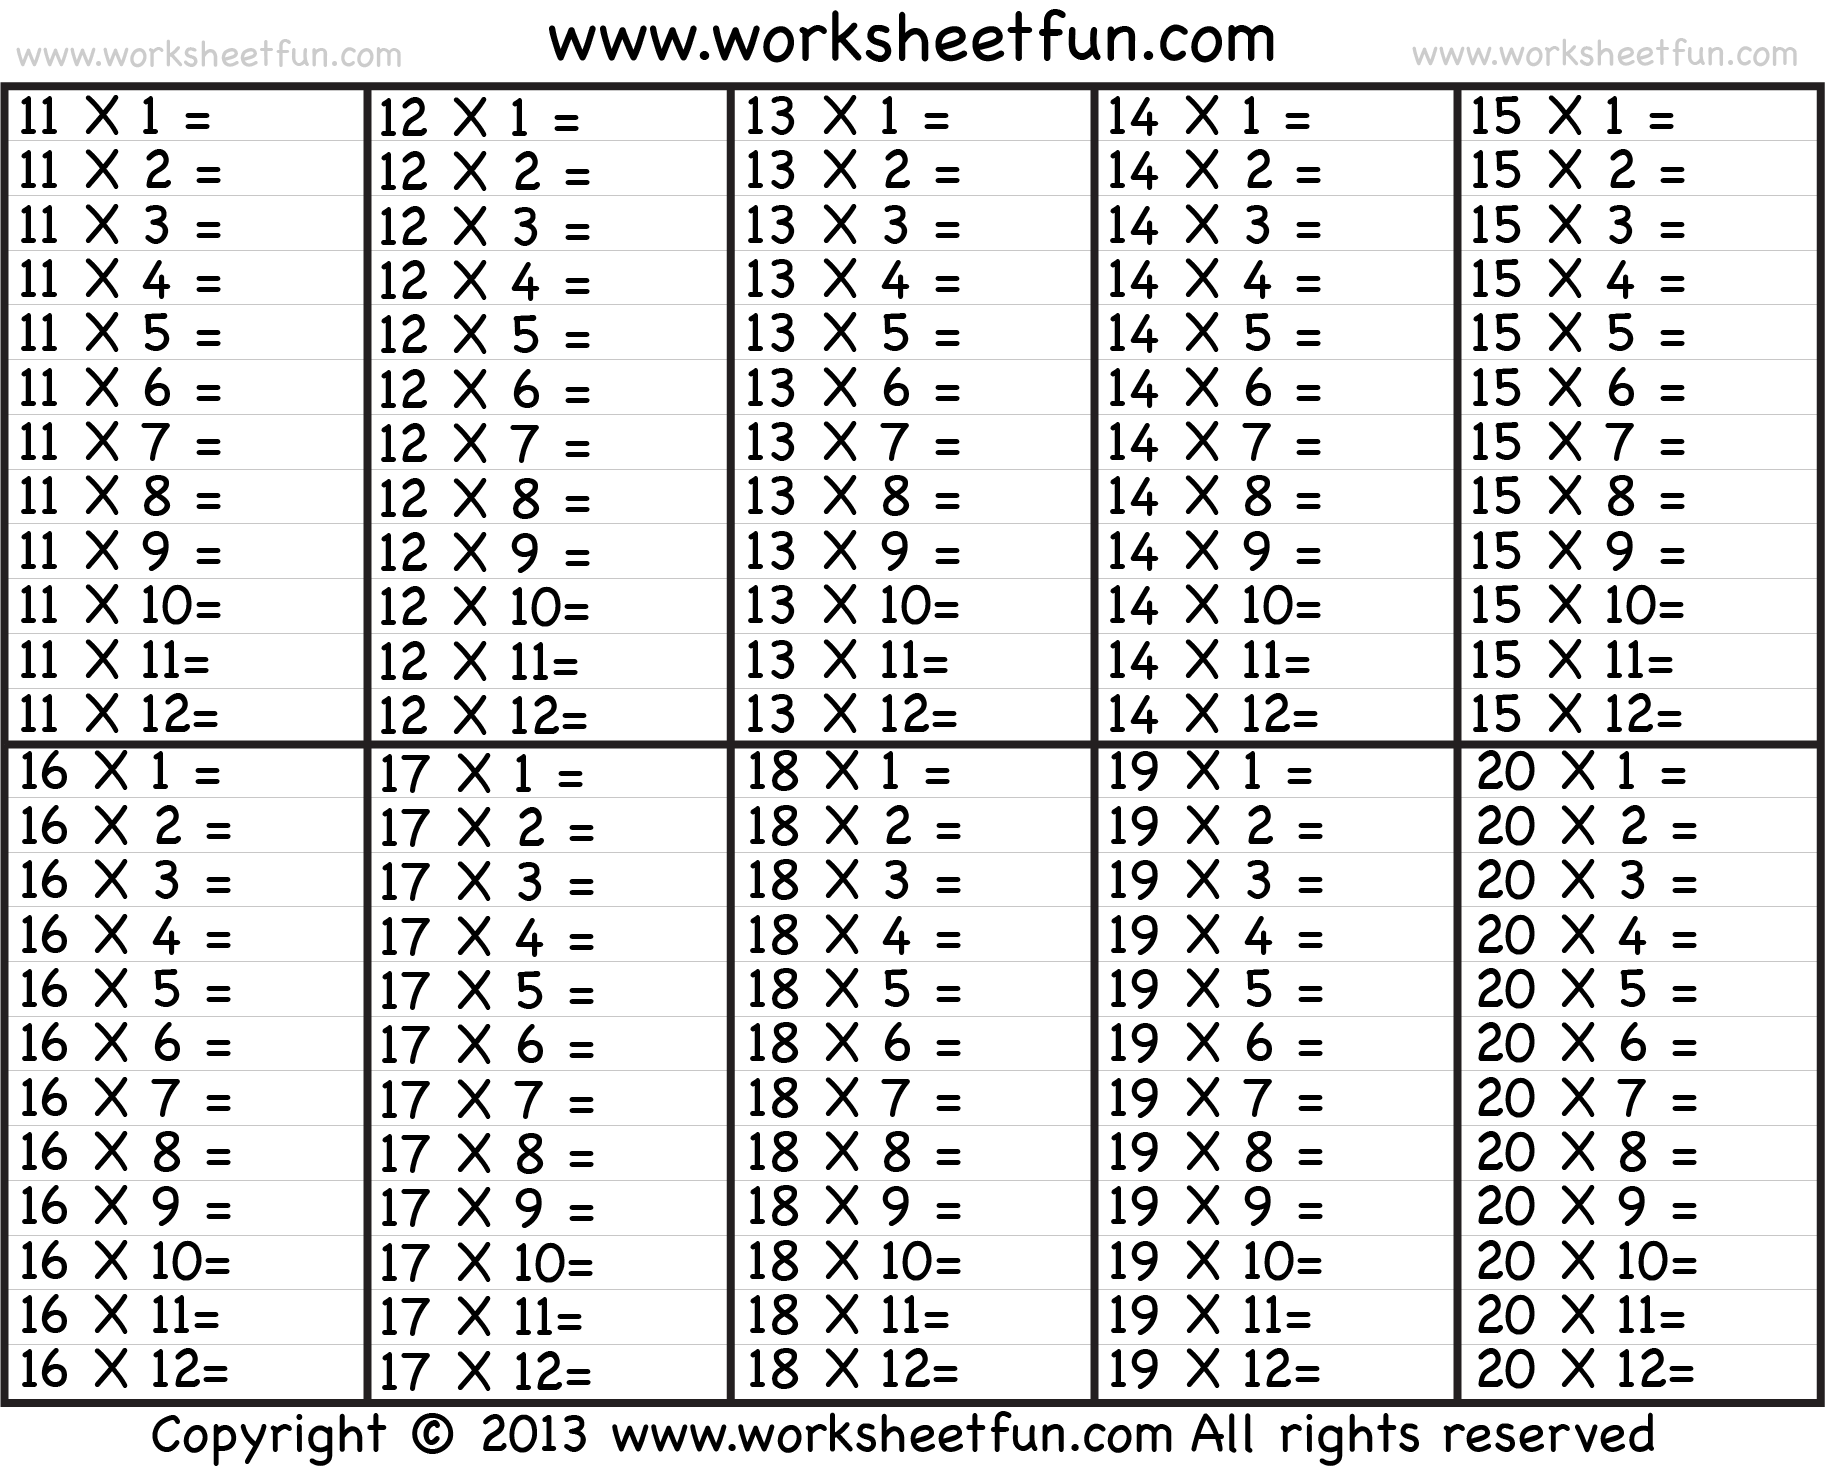 Daily Printable 5 X Times Tables Practice Worksheets With - Etsy 